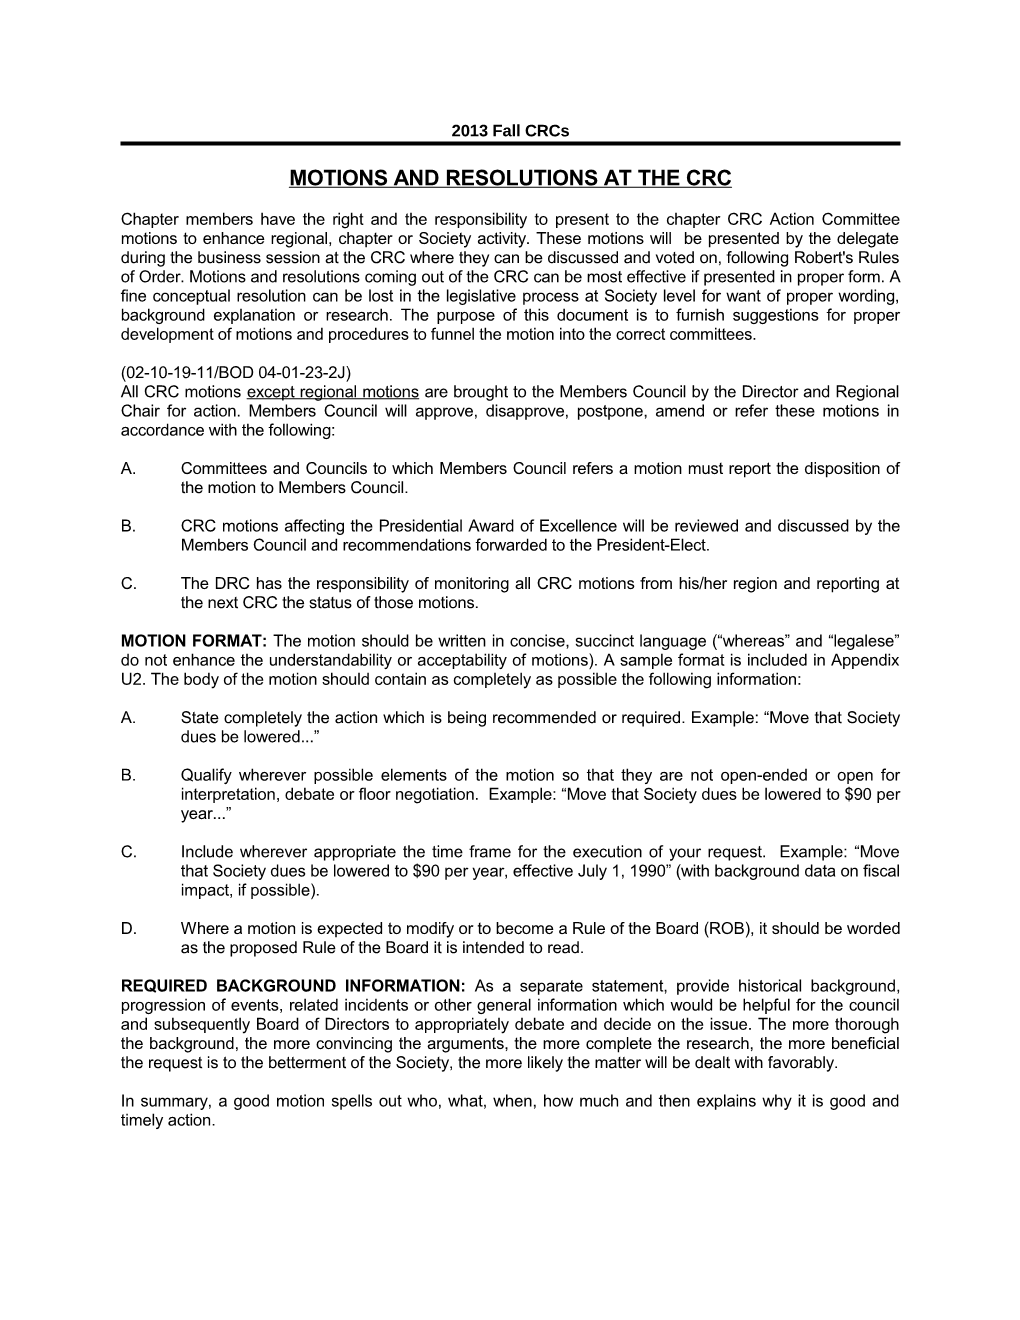 Motions and Resolutions at the Crc